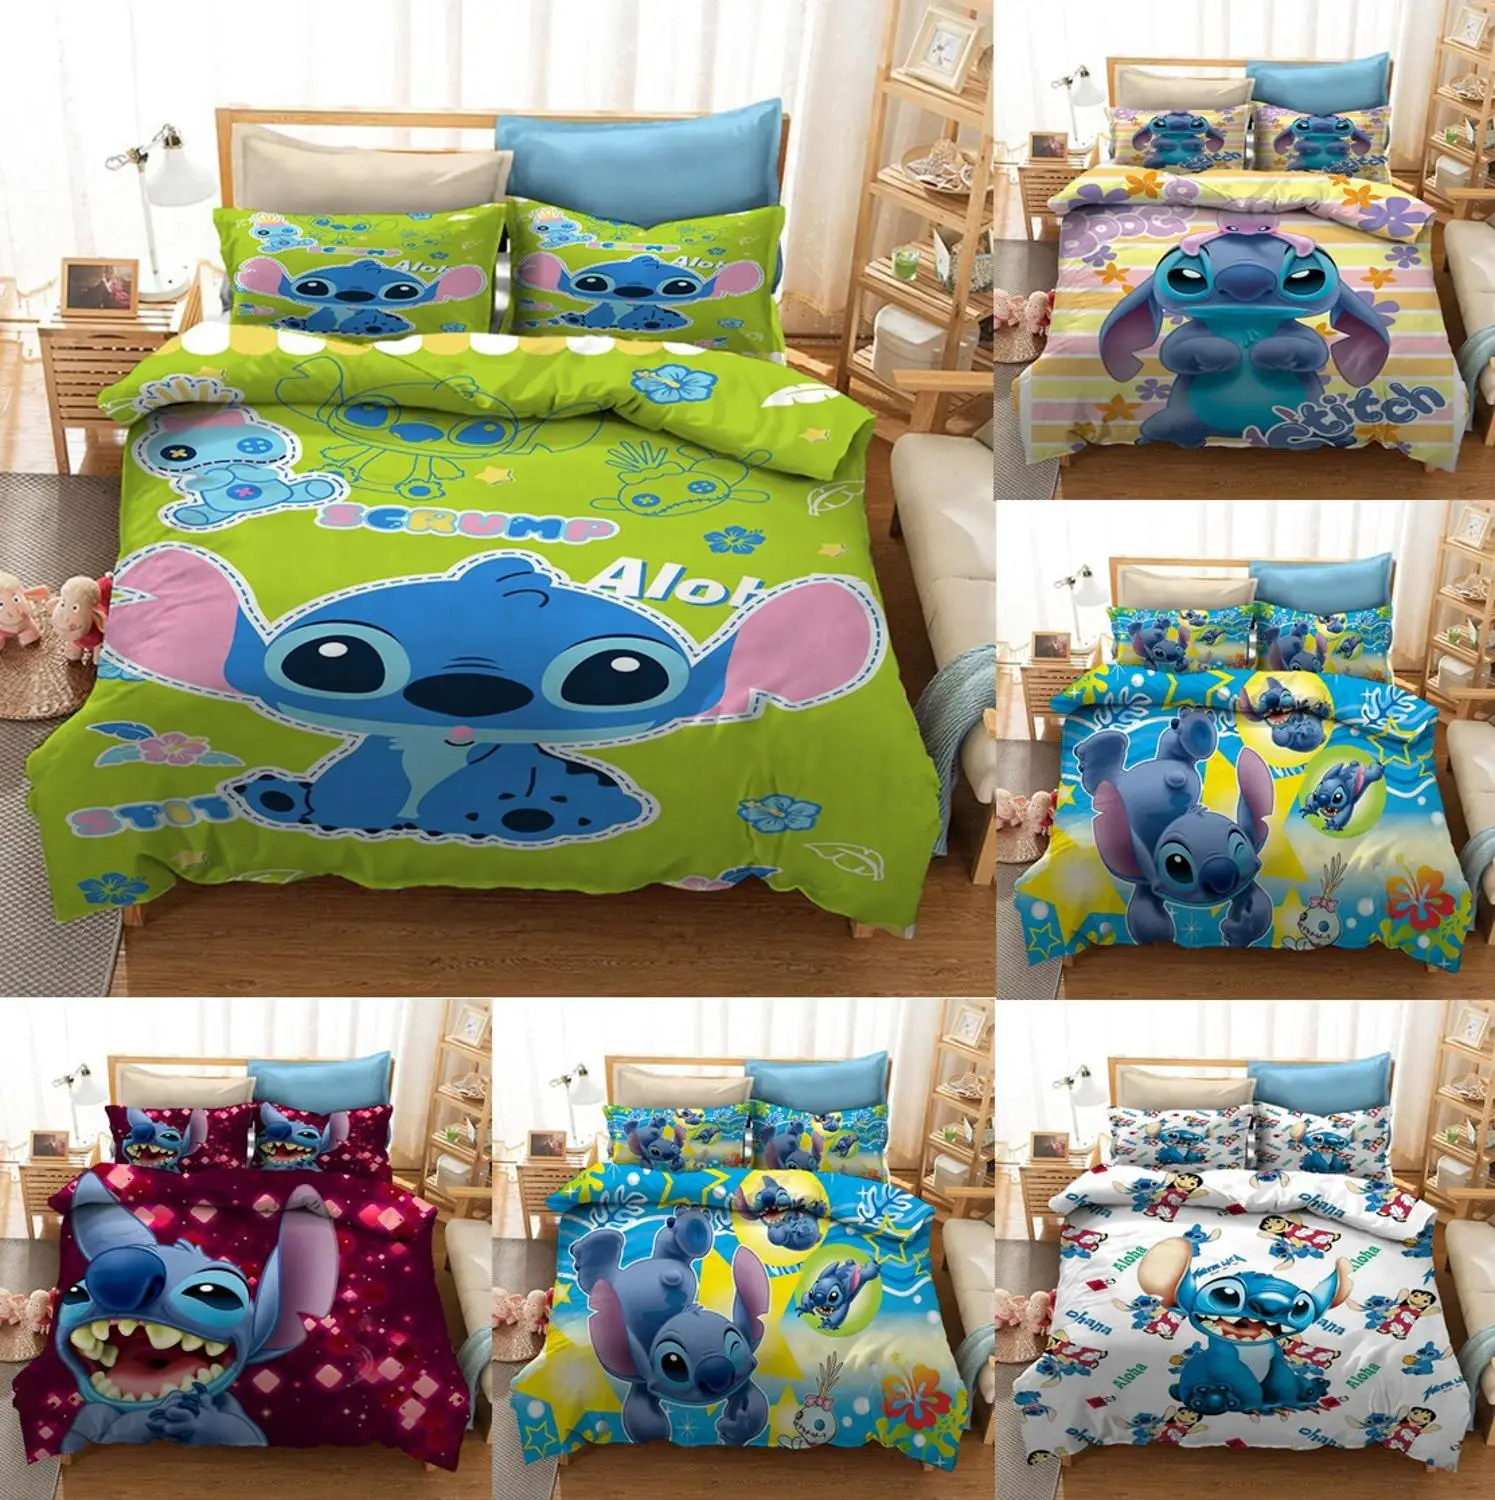 

Disney 3D Lilo & Stitch Cartoon Bedding Set Green and Red Duvet Quilt Cover Pillowcase Children's Deluxe Bedroom Decoration